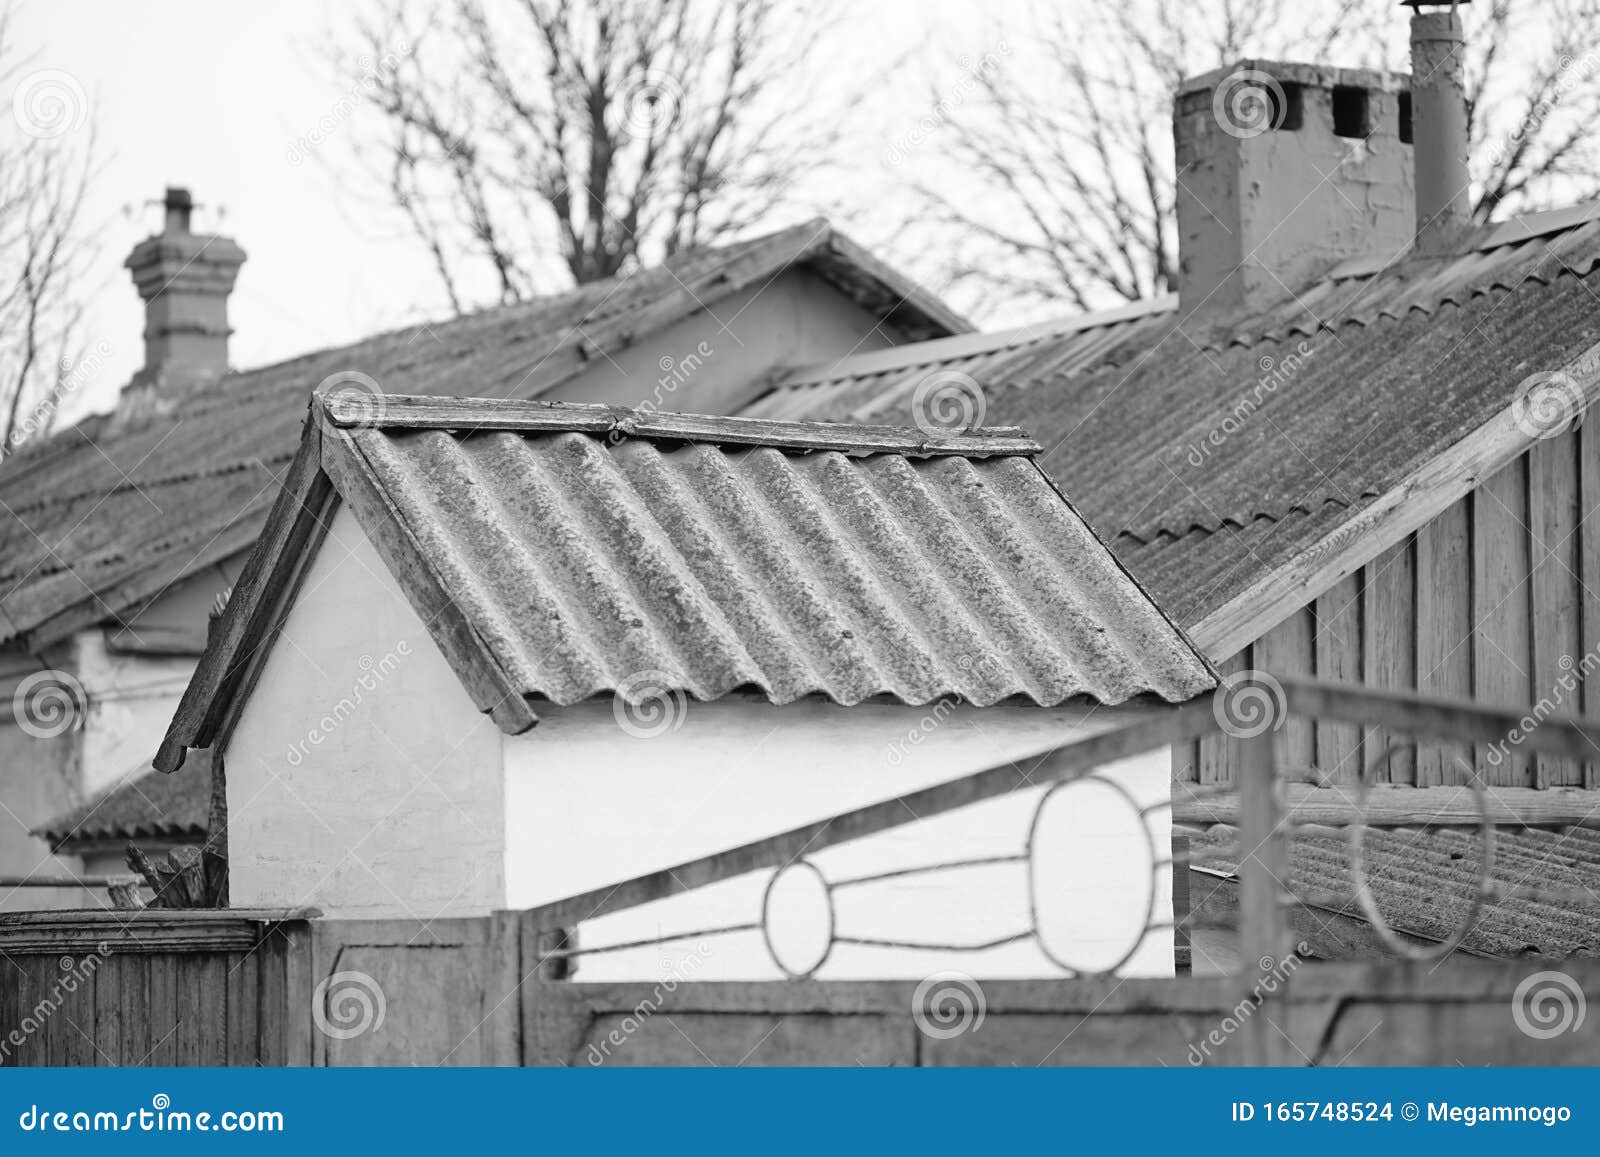 Rural Old Roofs Covered with Corrugated Asbestos Cement Sheet, Bw Photo  Stock Photo - Image of cloud, background: 165748524